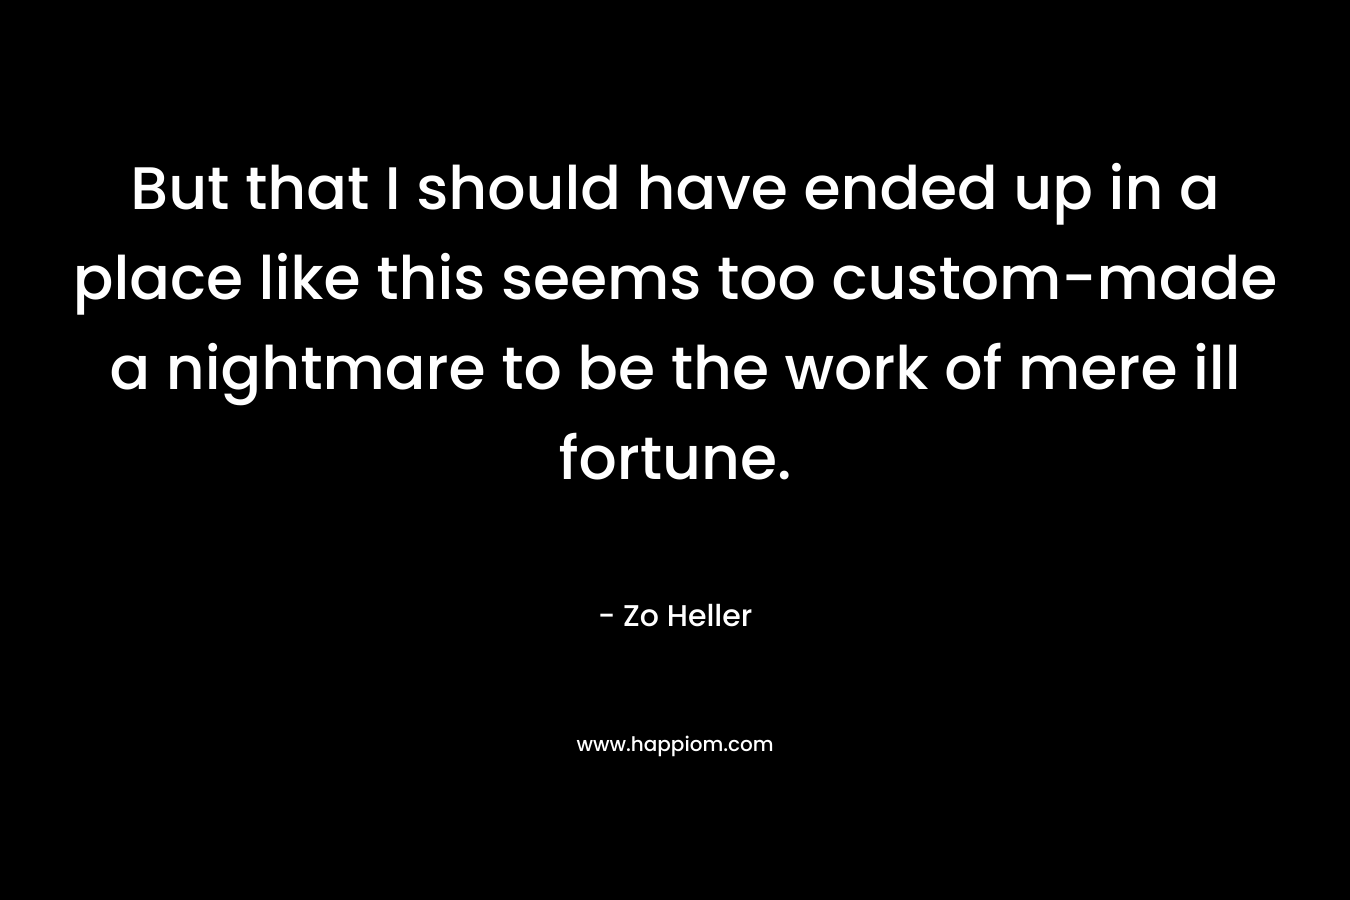 But that I should have ended up in a place like this seems too custom-made a nightmare to be the work of mere ill fortune. – Zo Heller